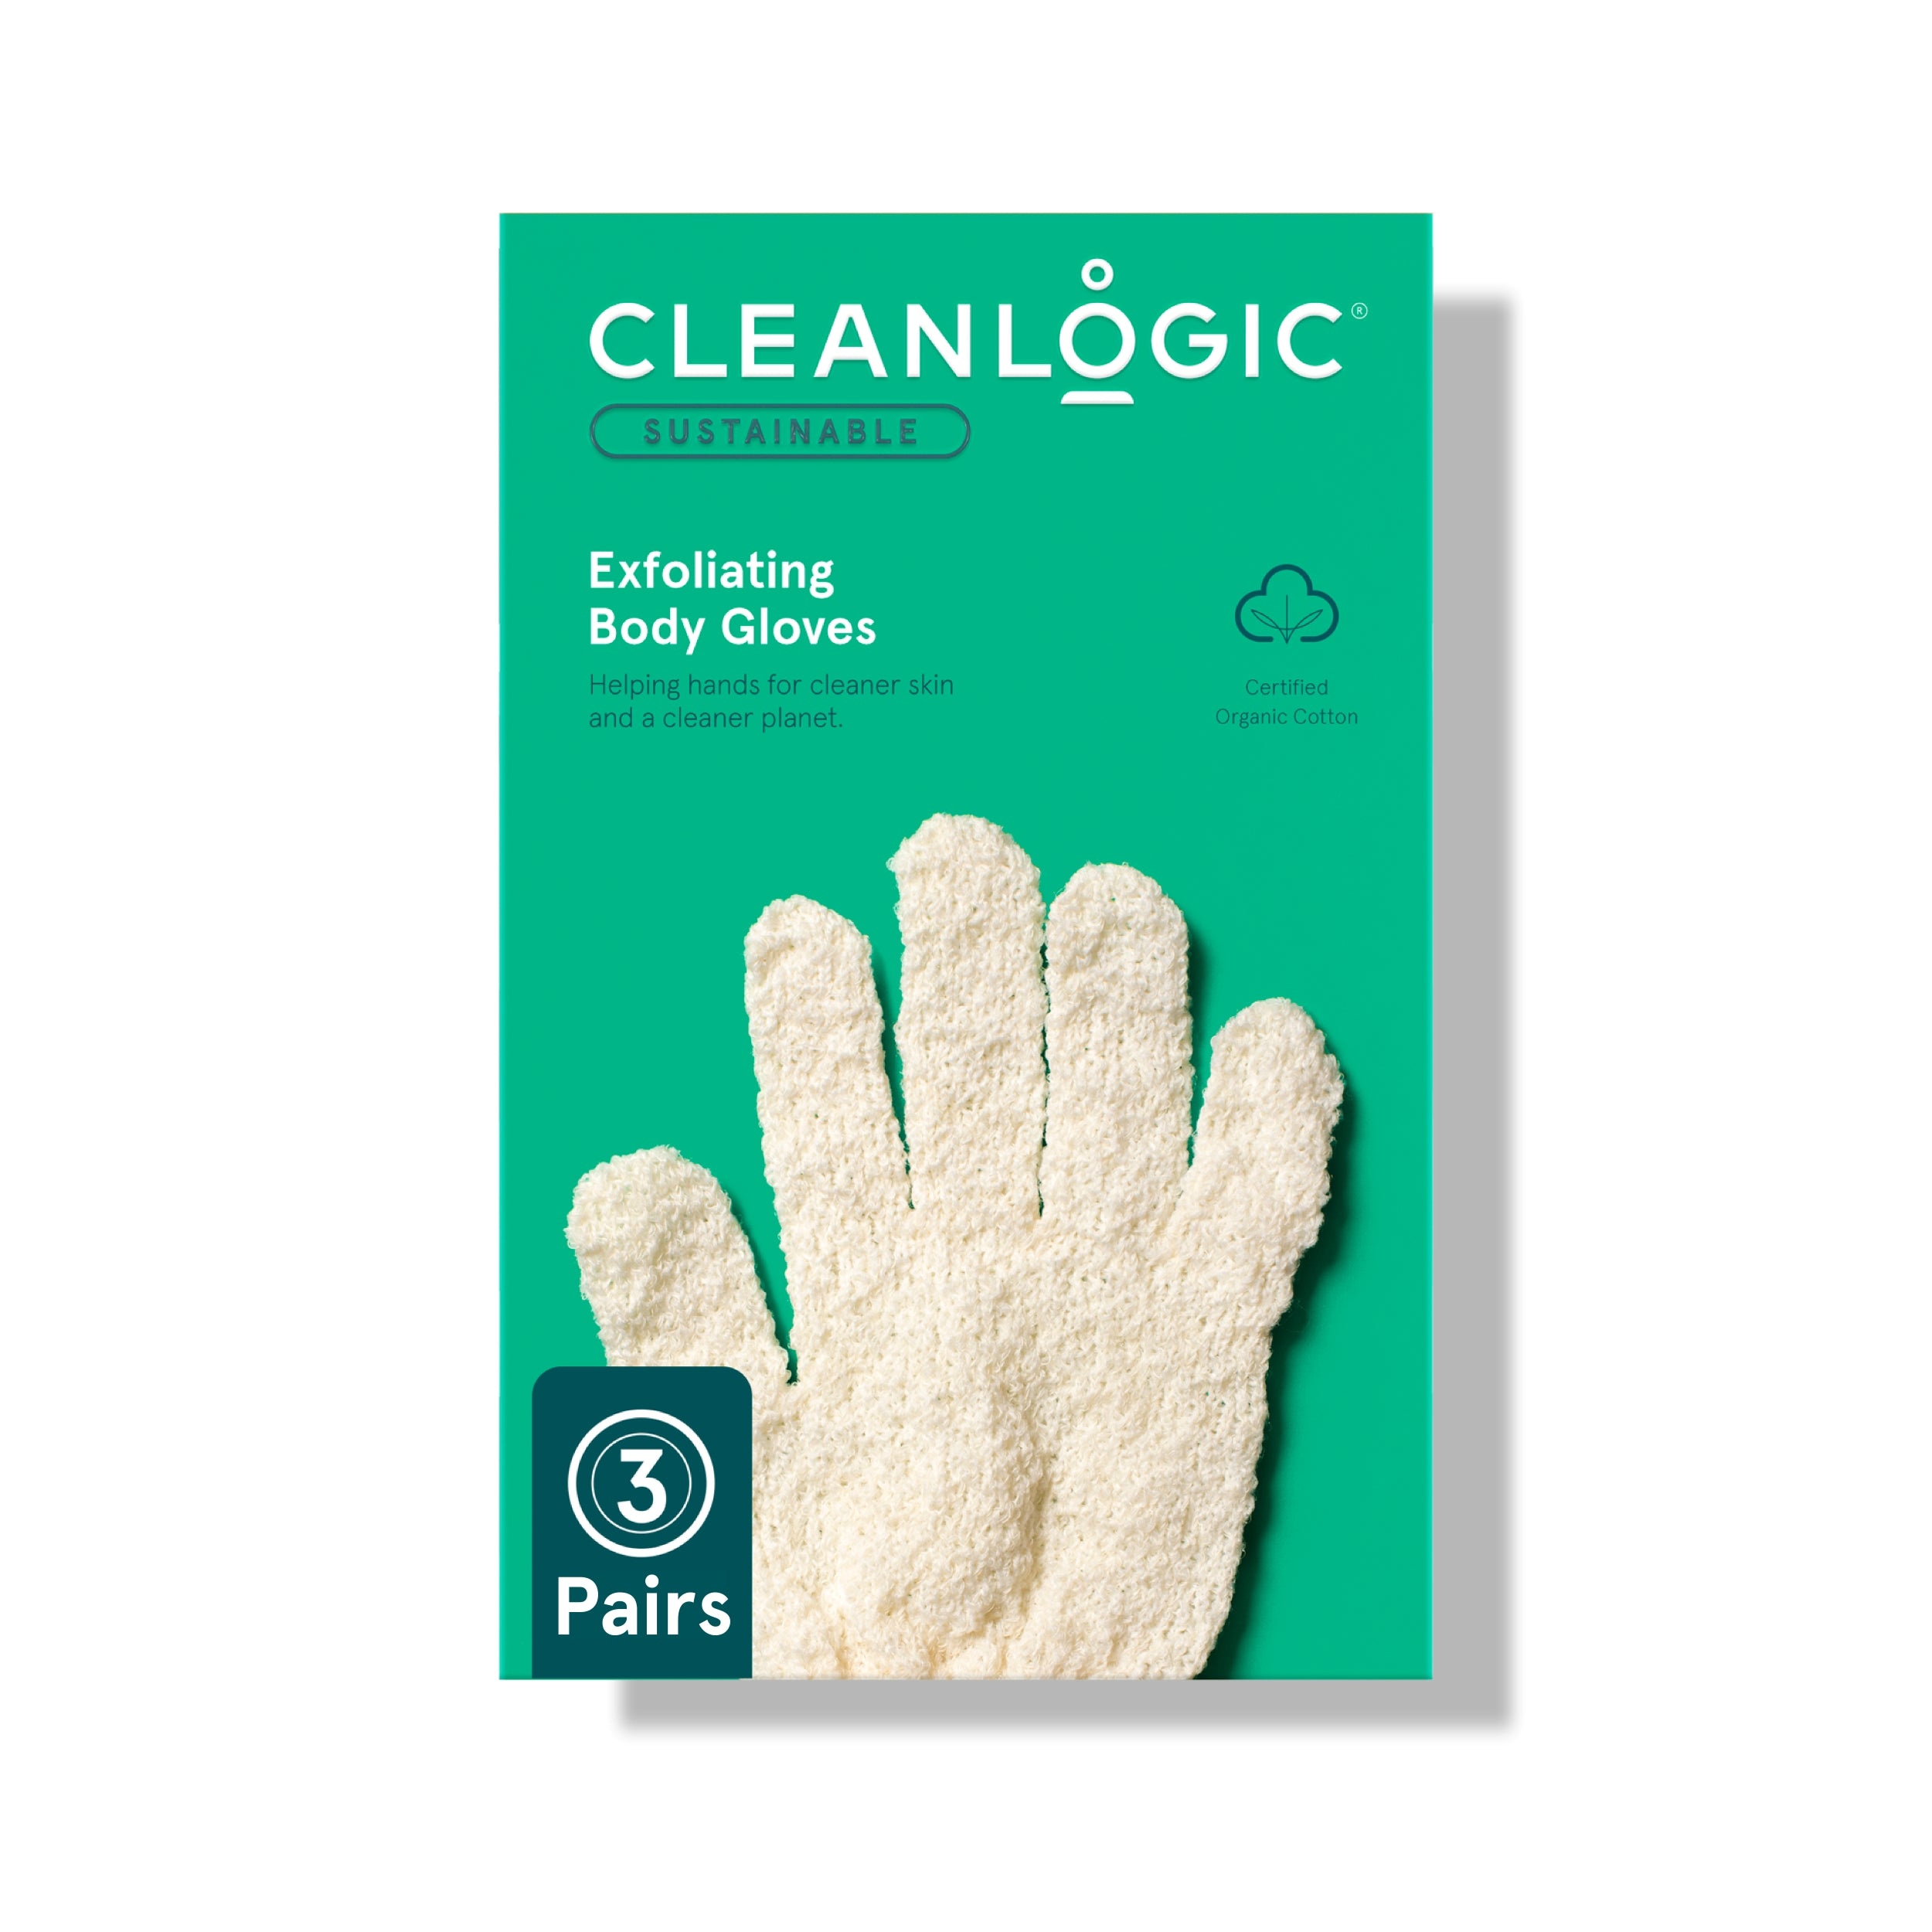 Sustainable Exfoliating Body Gloves, 3 Pair – 6 Count